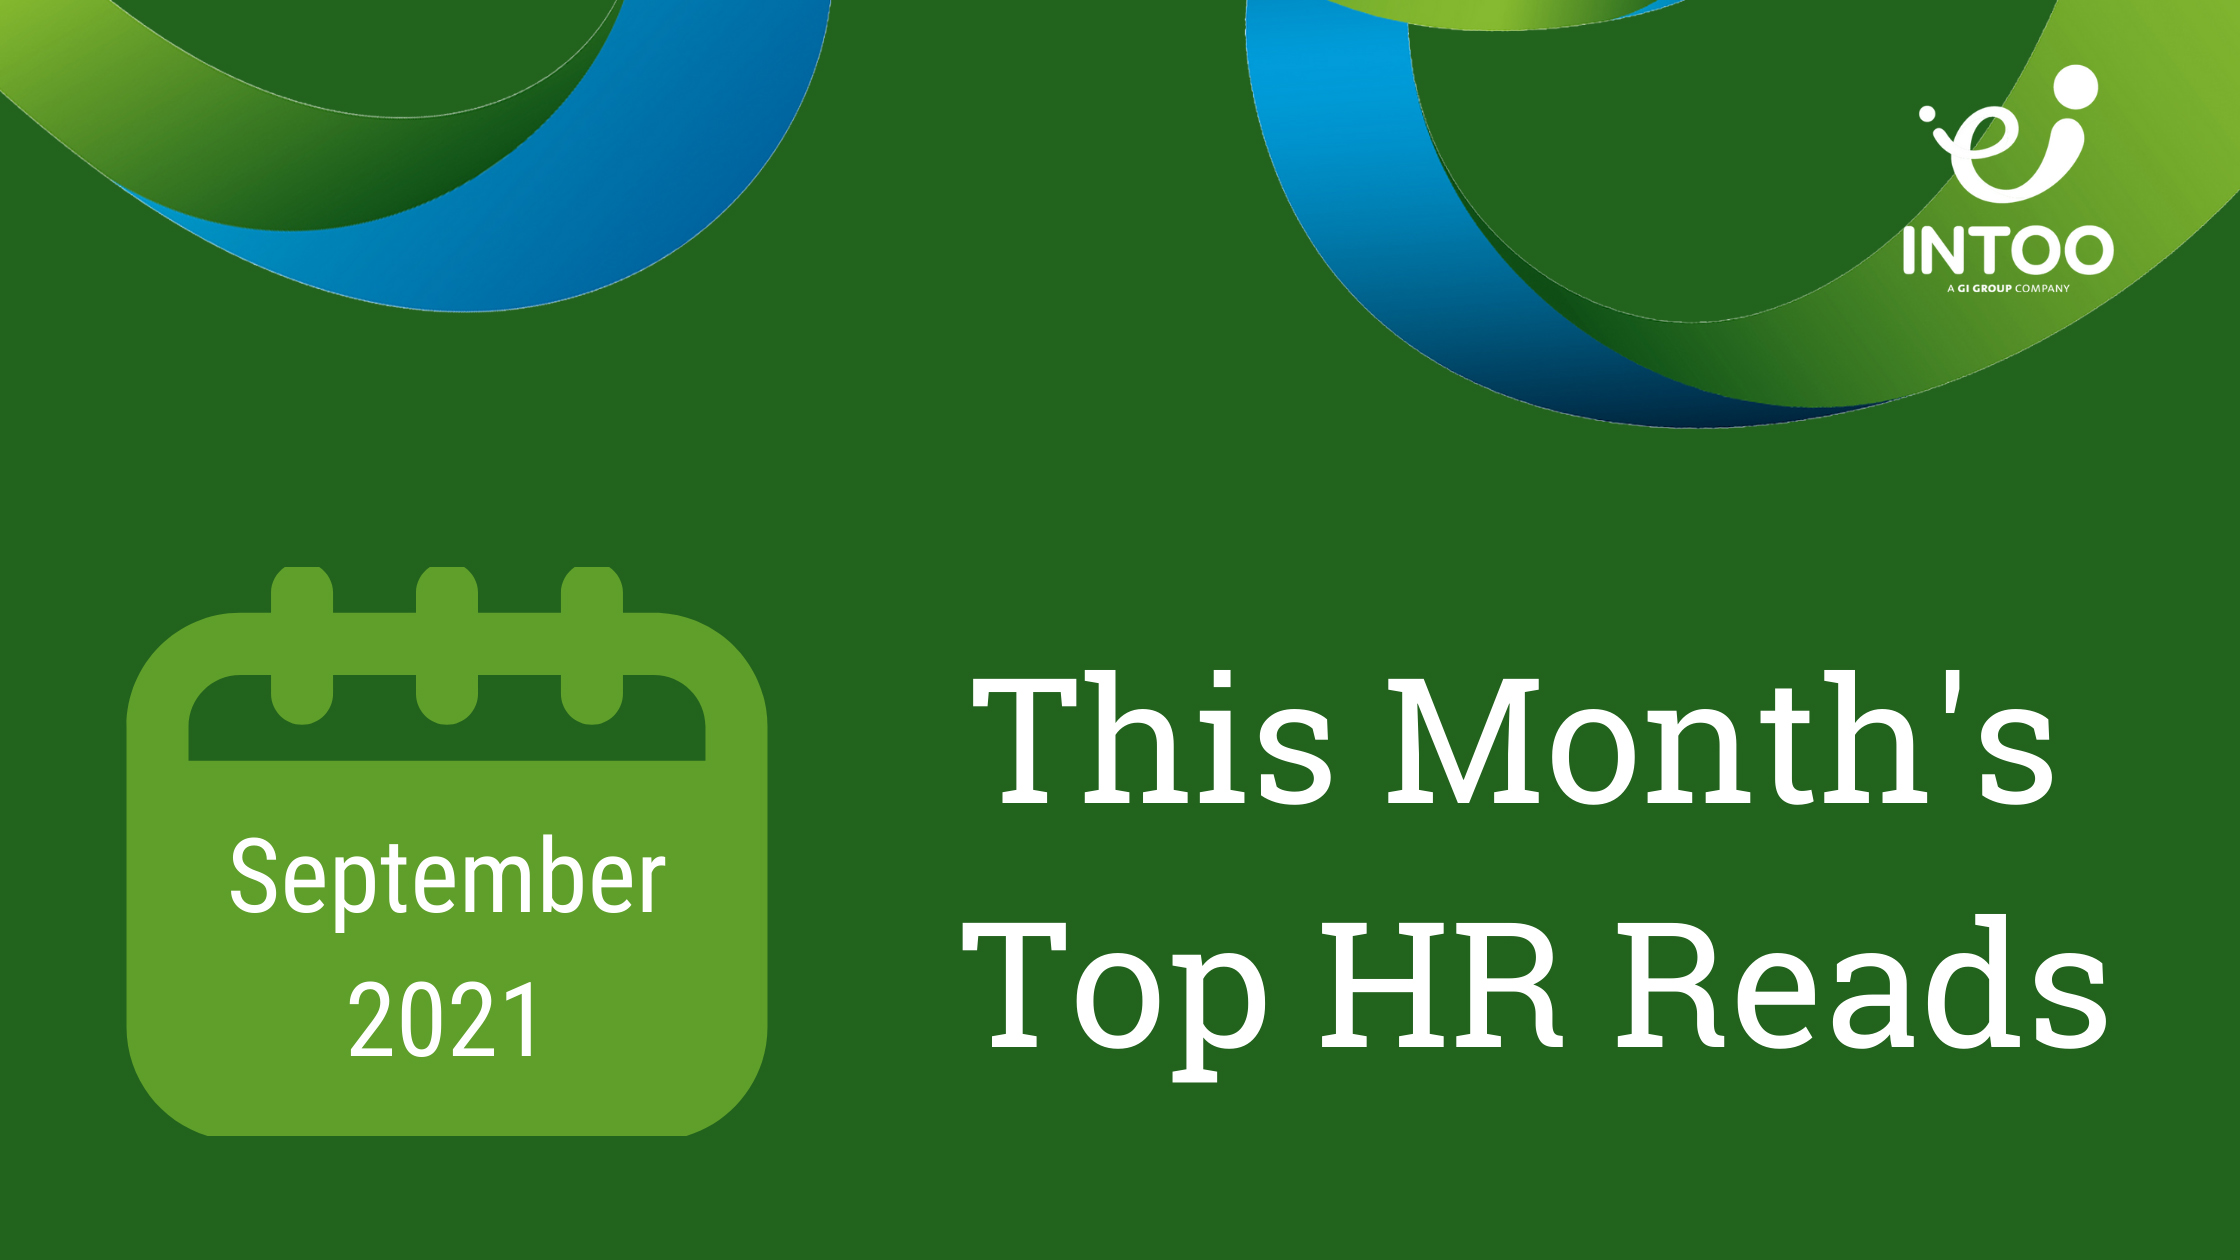 HR Trends - the top HR reads for September 2021